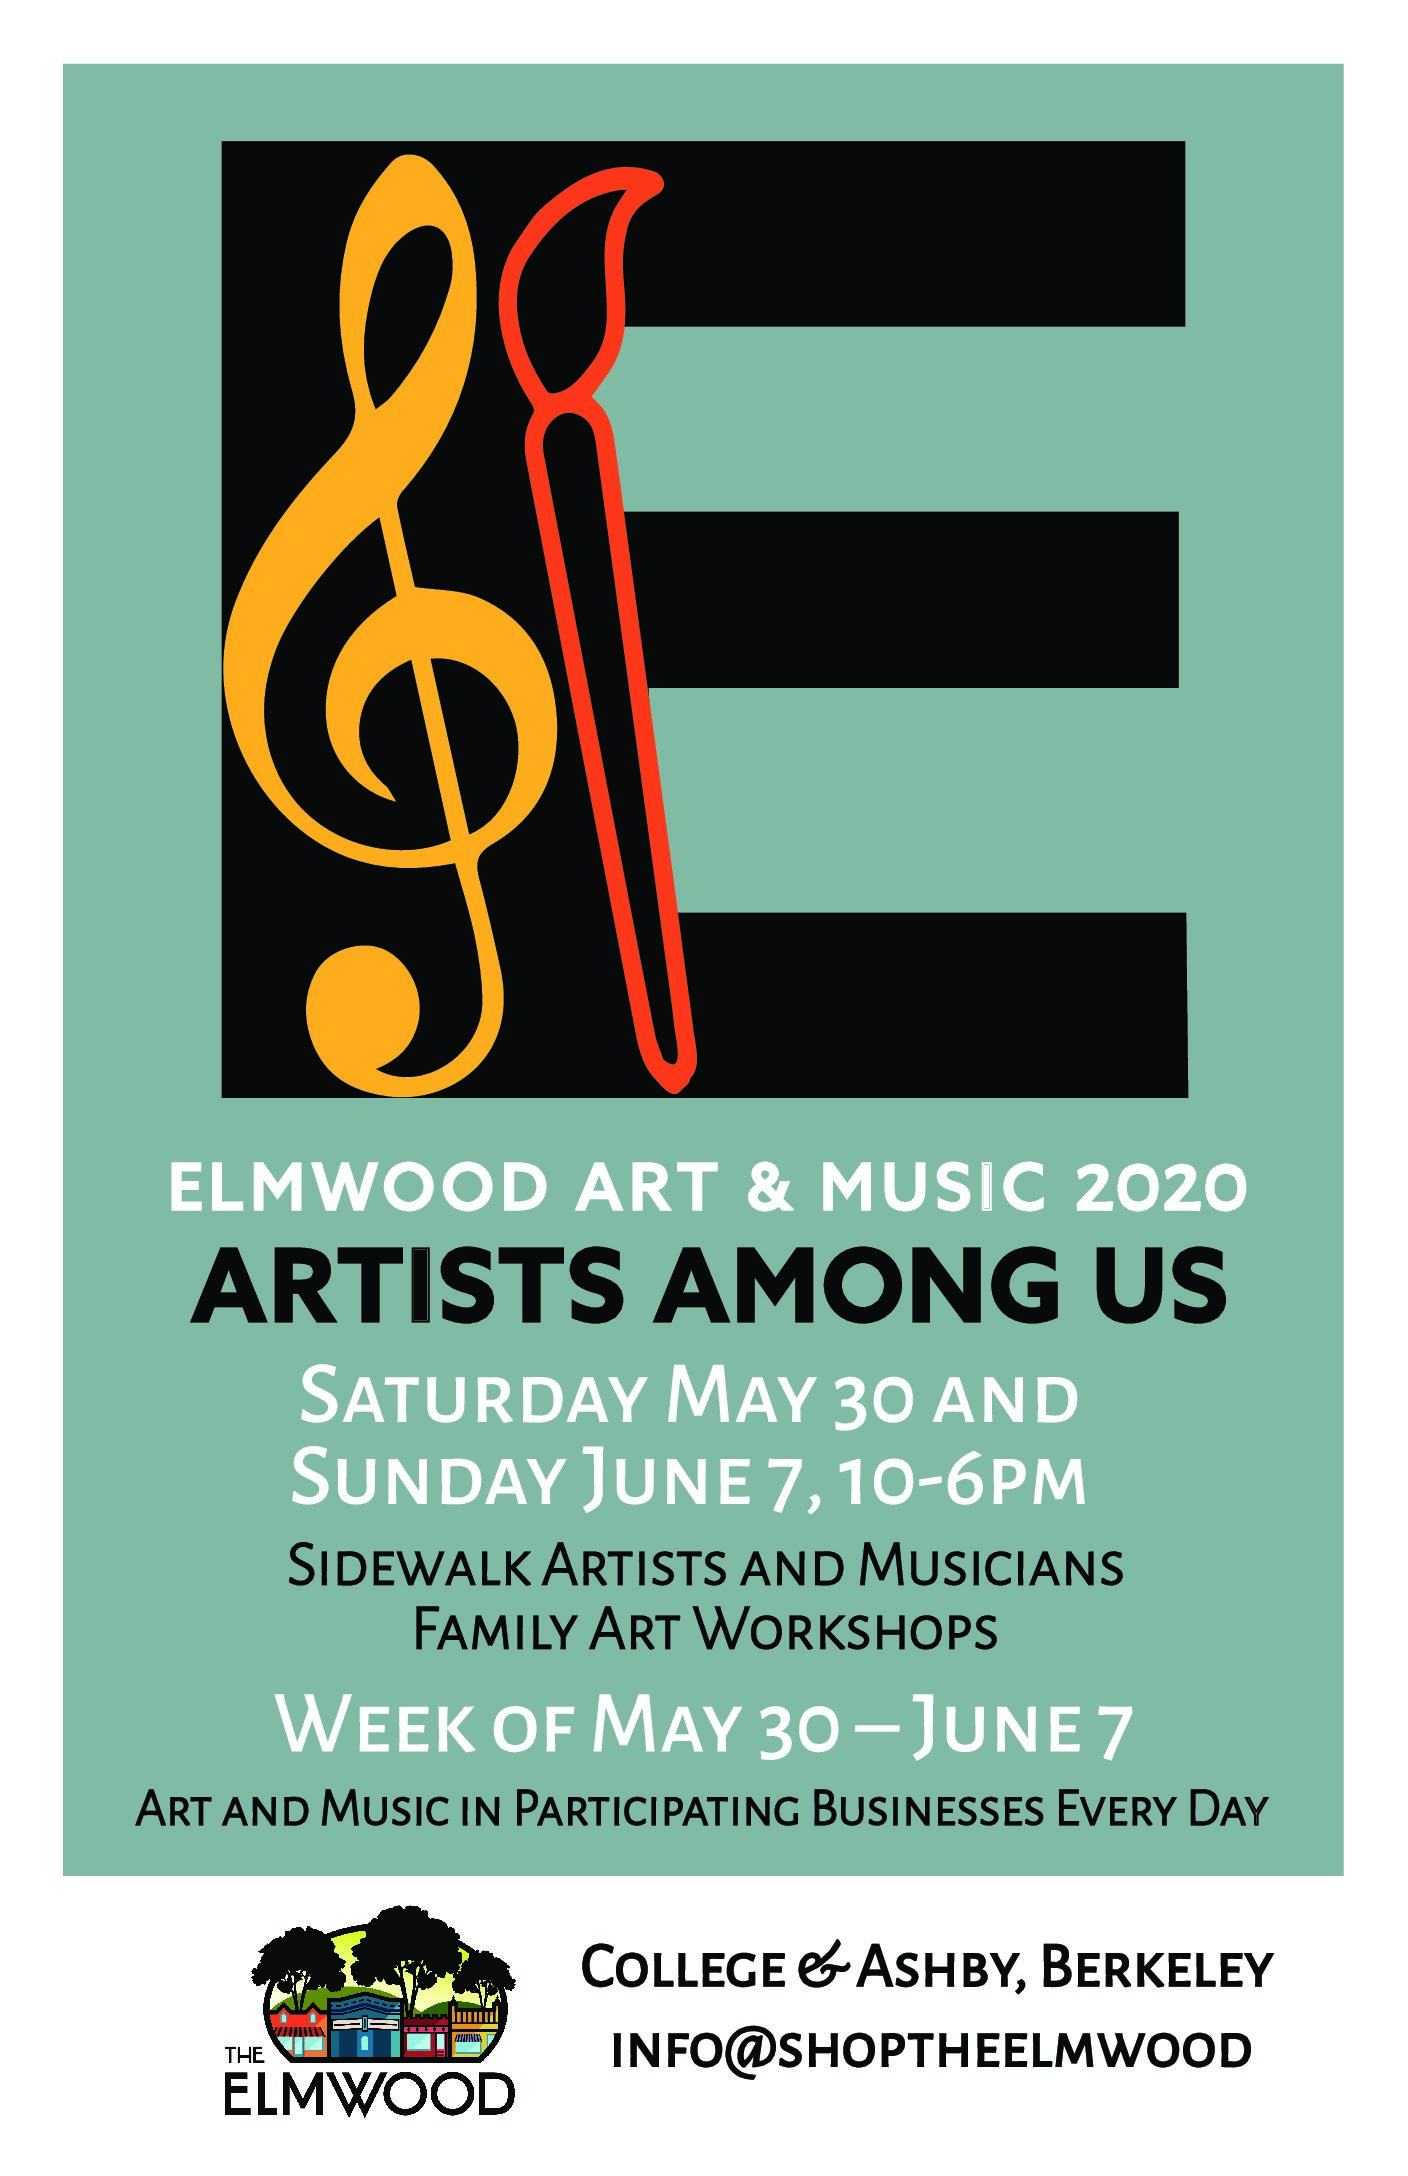 Call to Artists Please participate in Elmwood Art & Music 2020 Shop